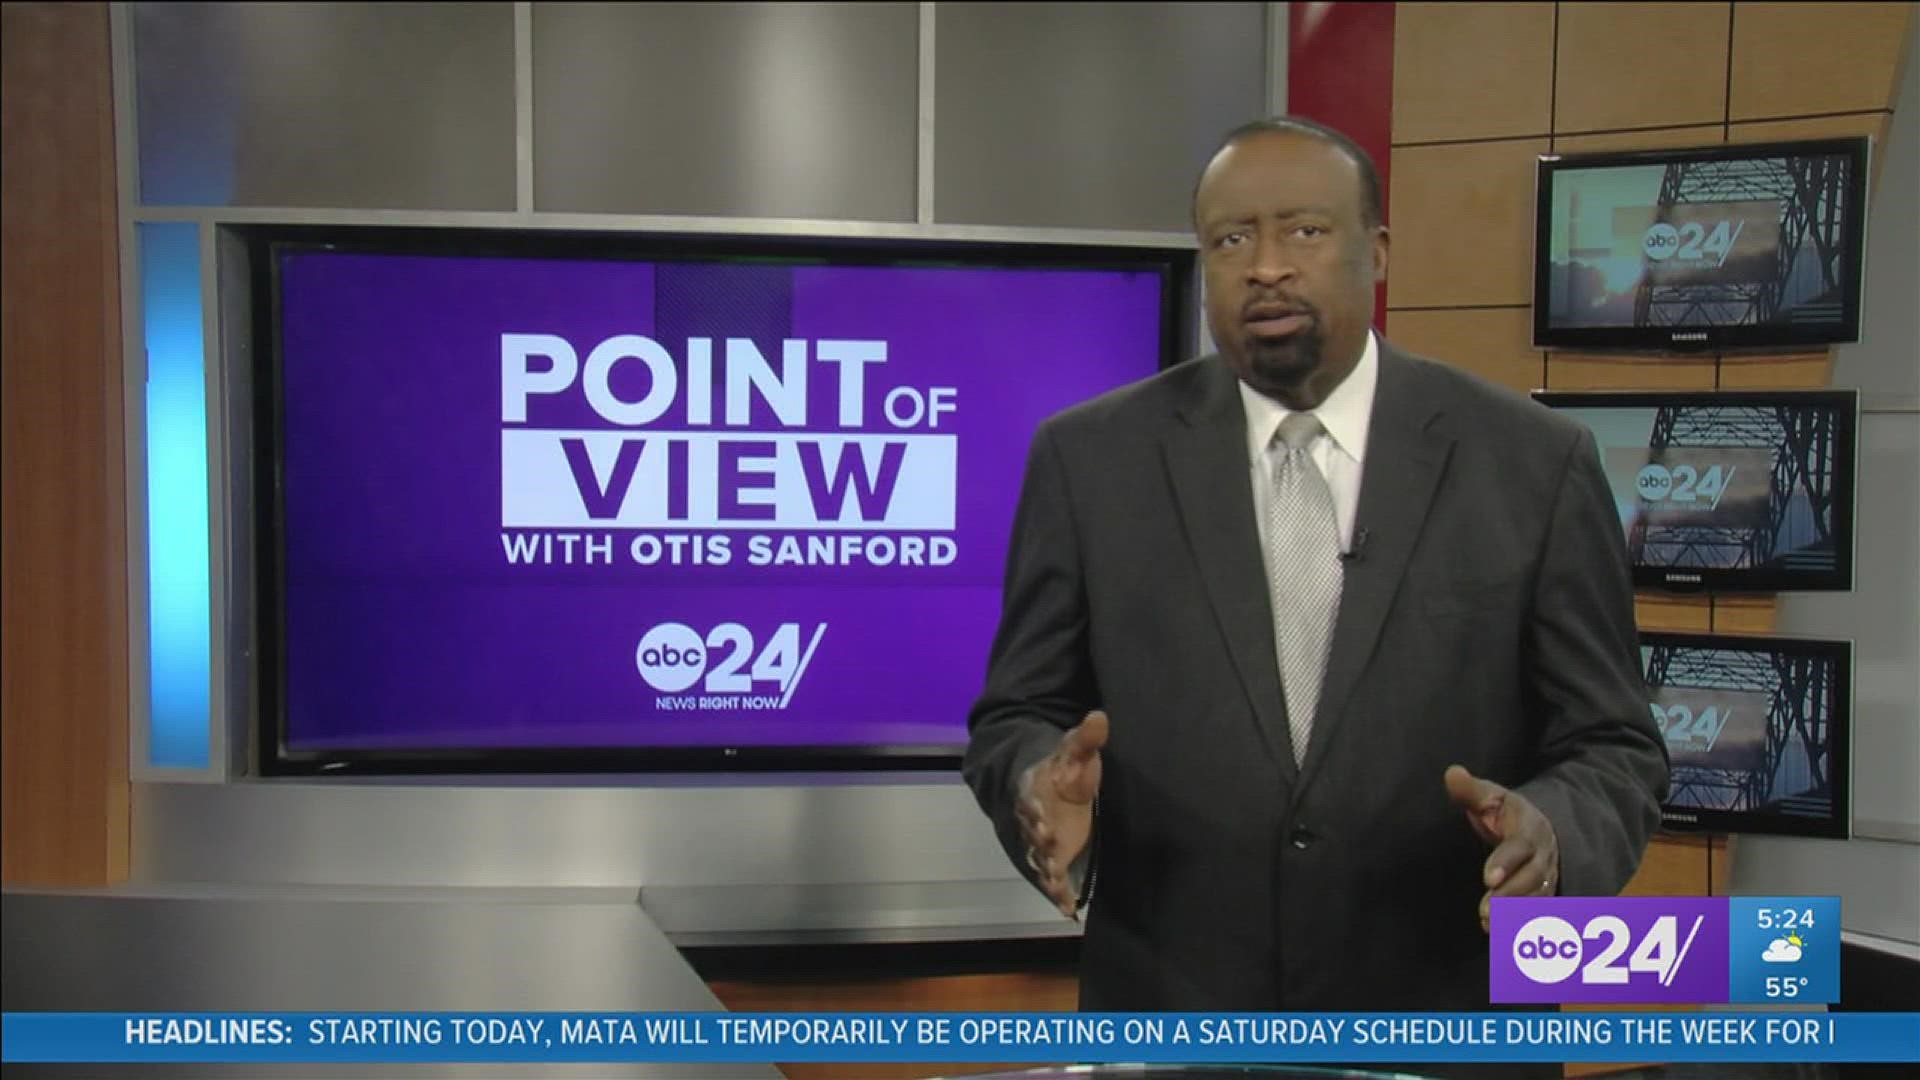 ABC 24 political analyst and commentator Otis Sanford shared his point of view on MLK Day and voting rights.